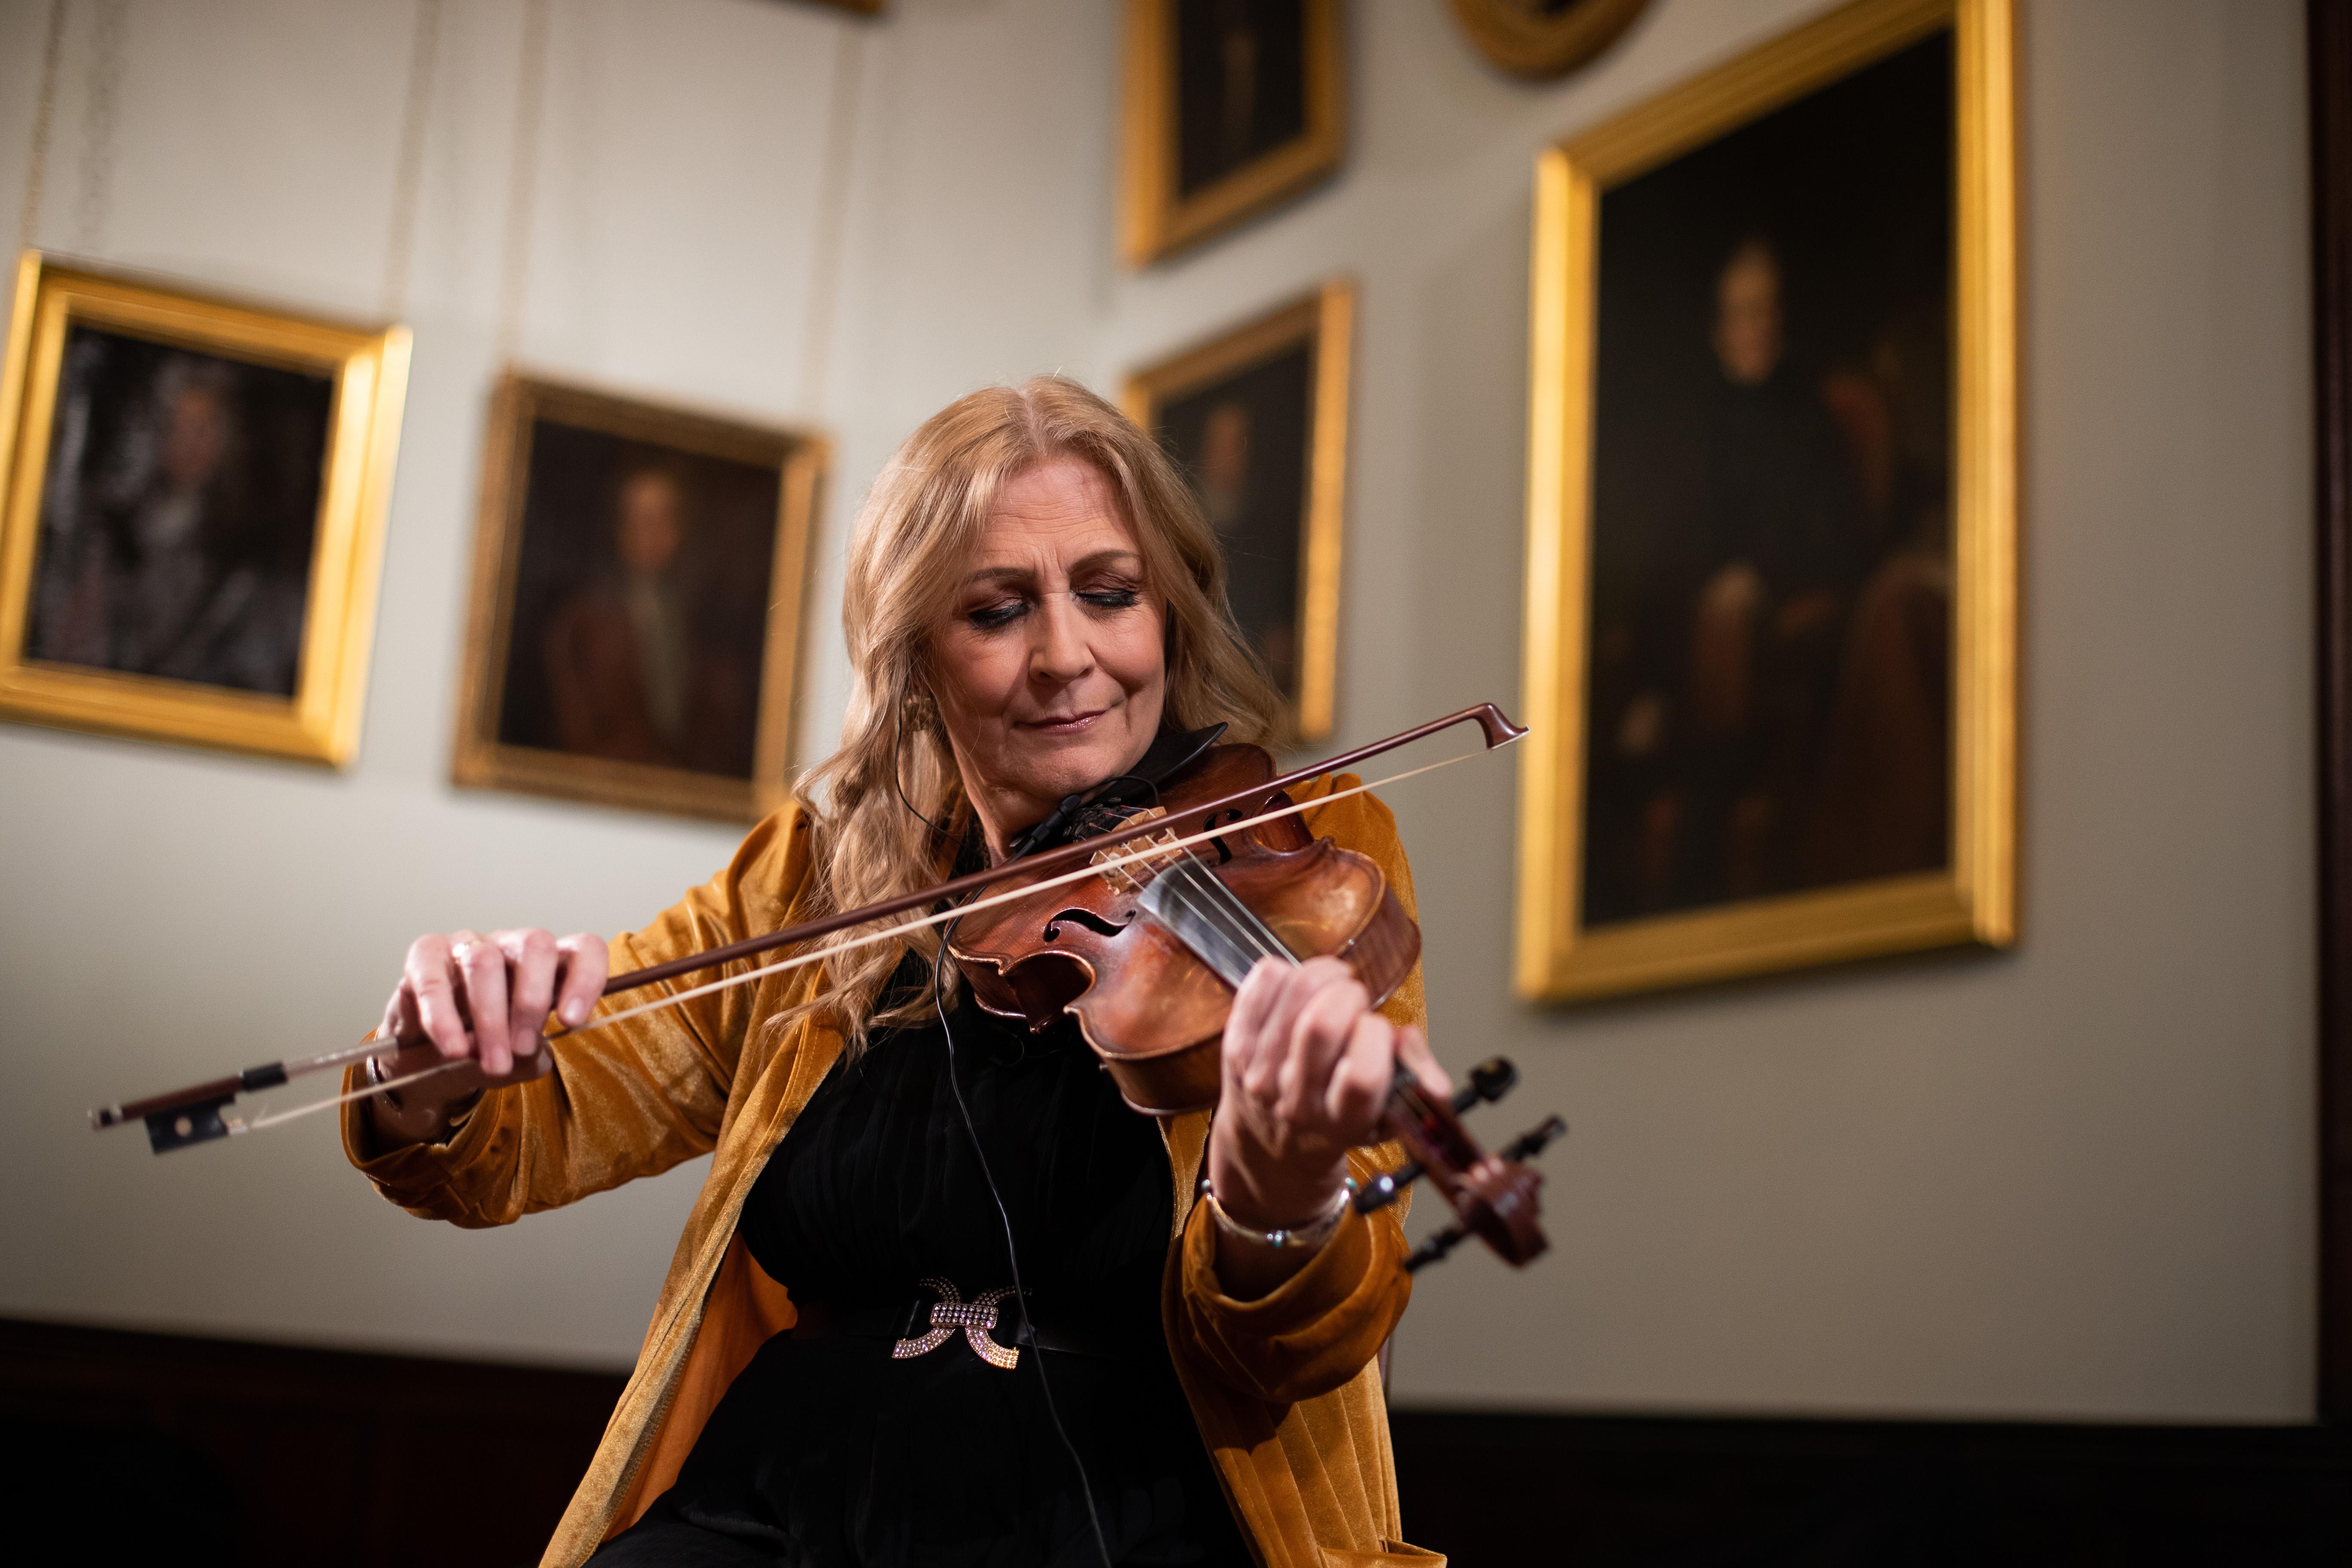 Malahide Castle features in TradFest in Fingal sessions